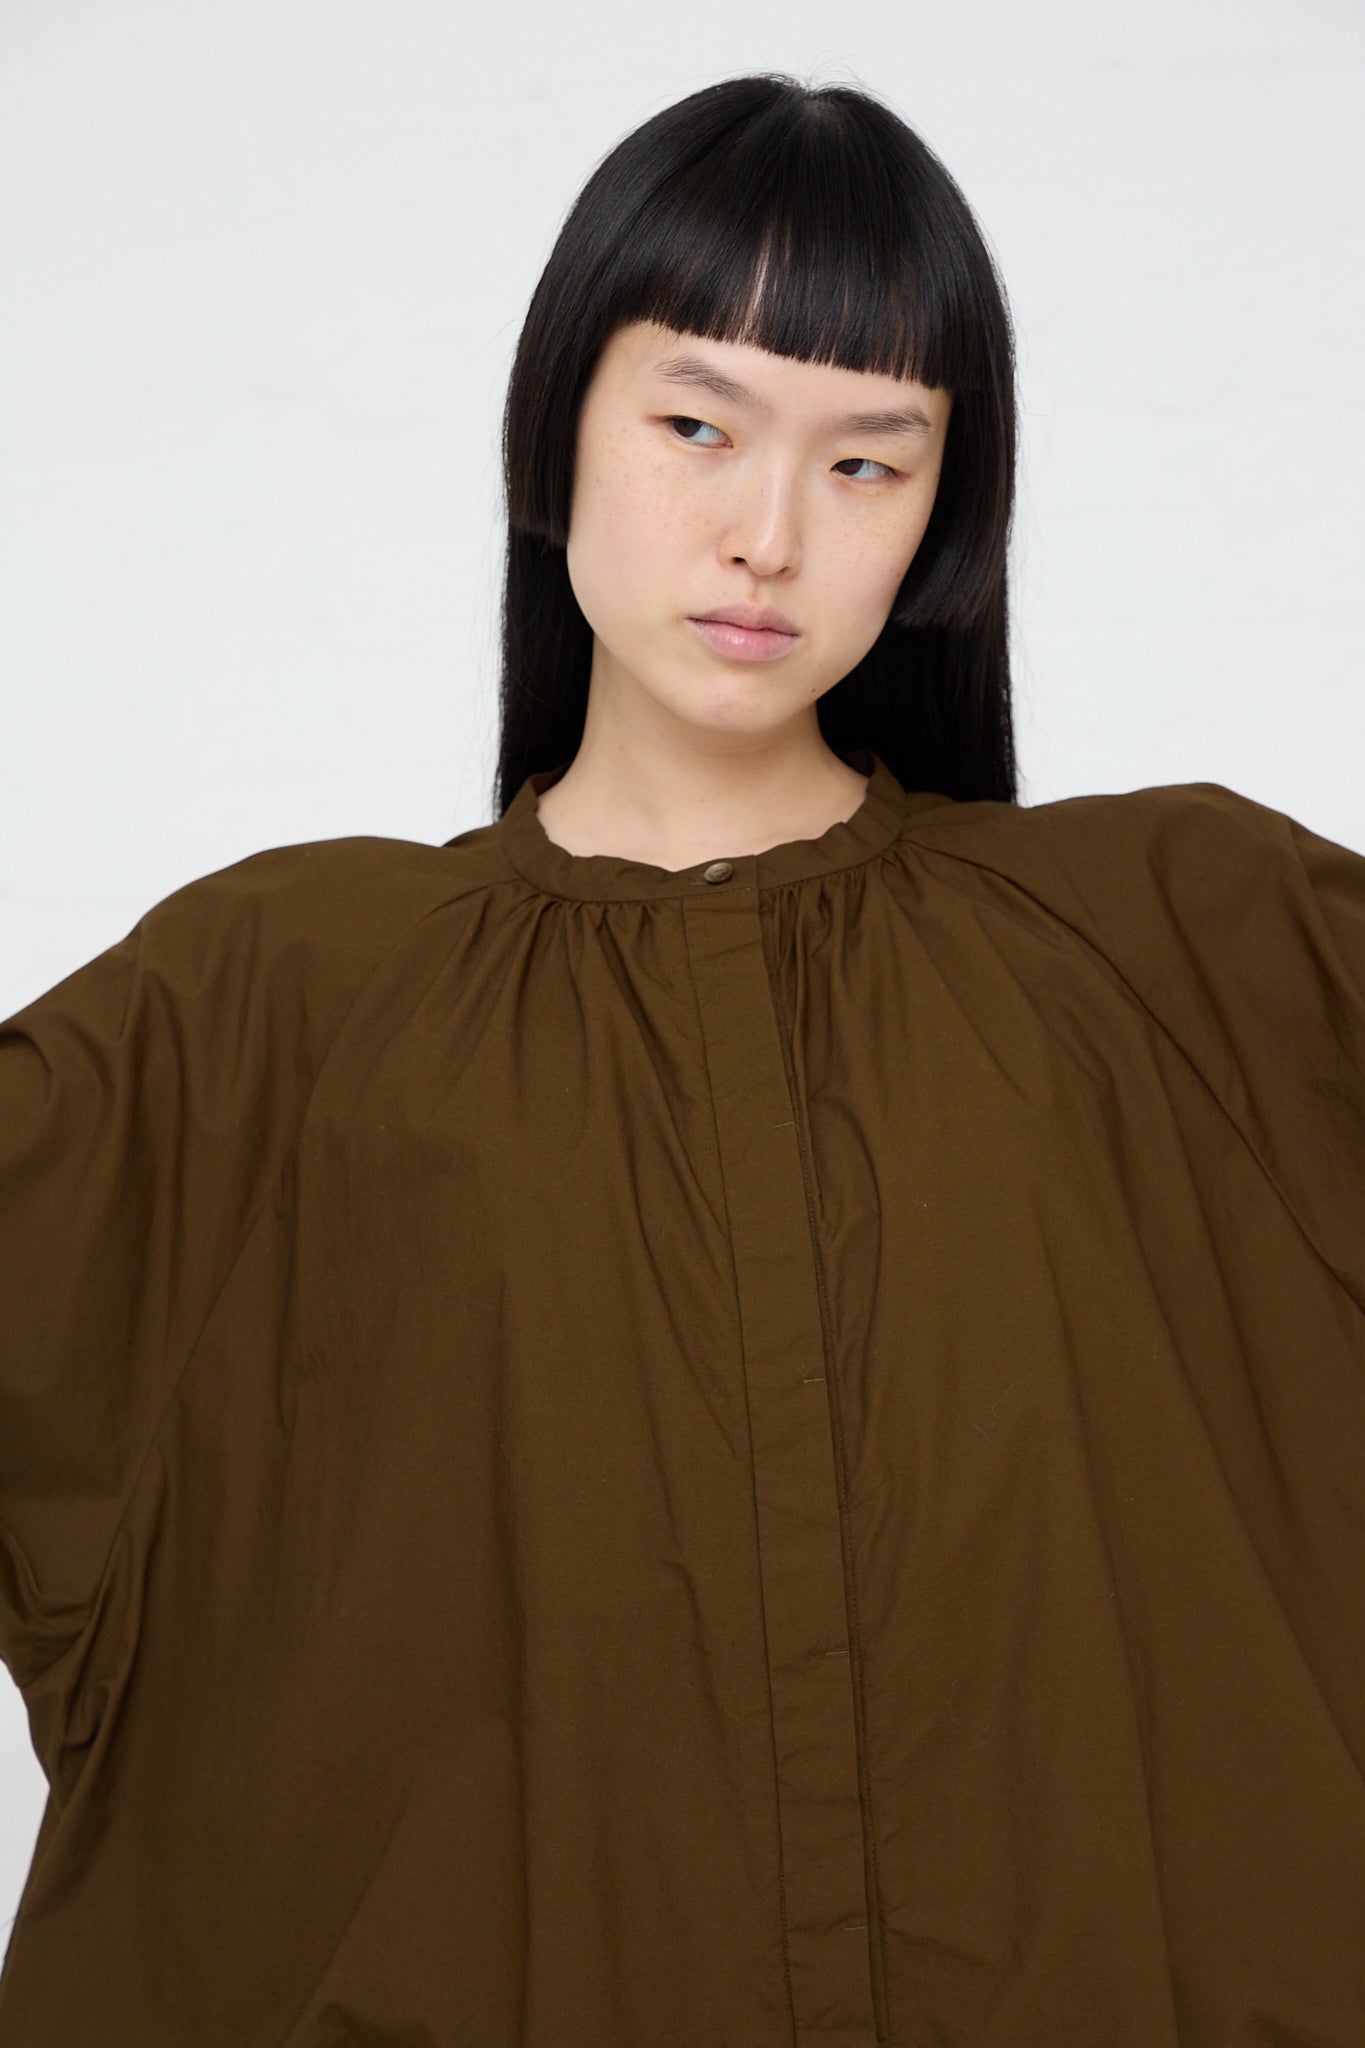 The model is wearing an Ichi Woven Cotton Shirt in Seal Brown. Up close.